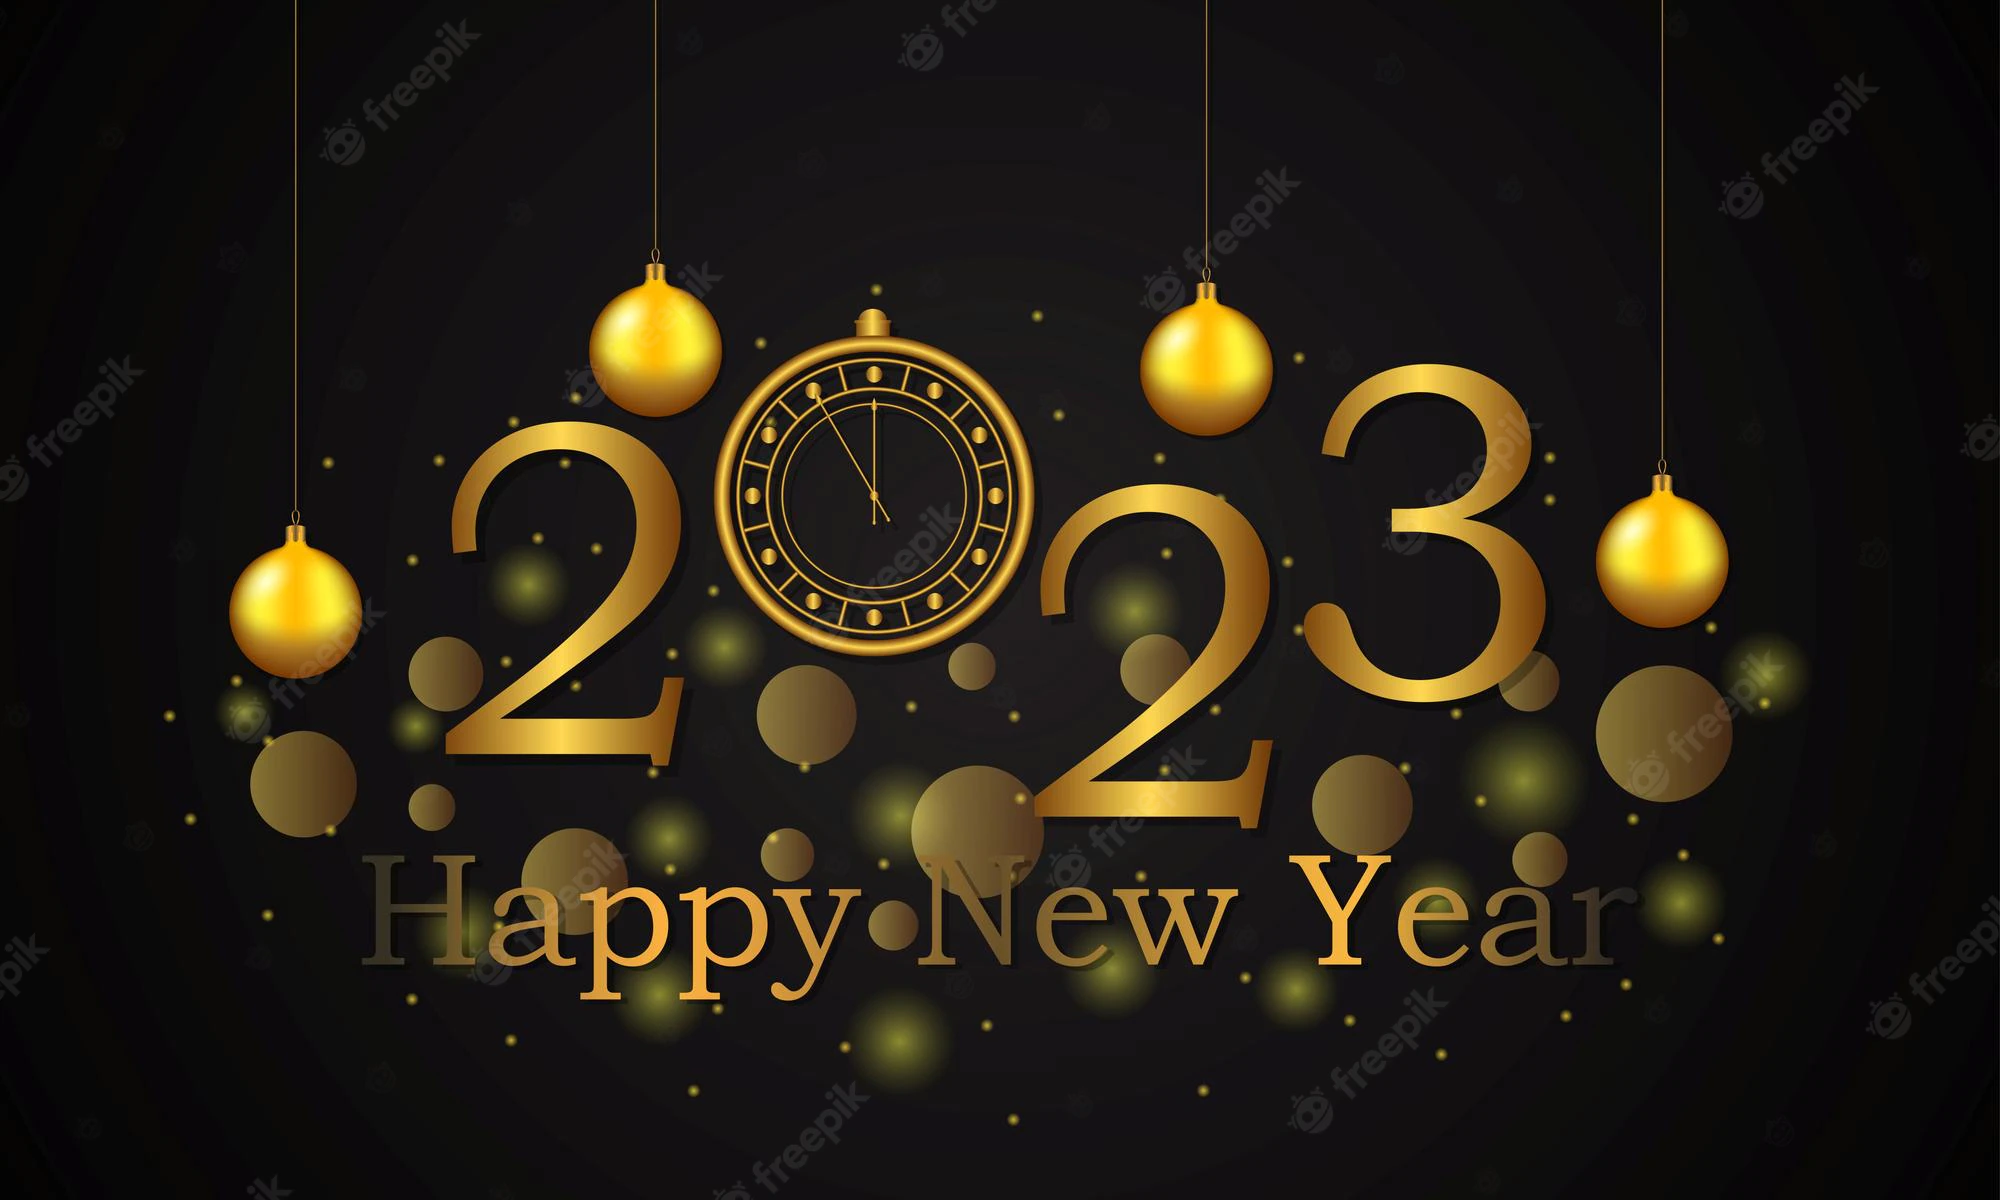 advance happy new year stock photos gallery download